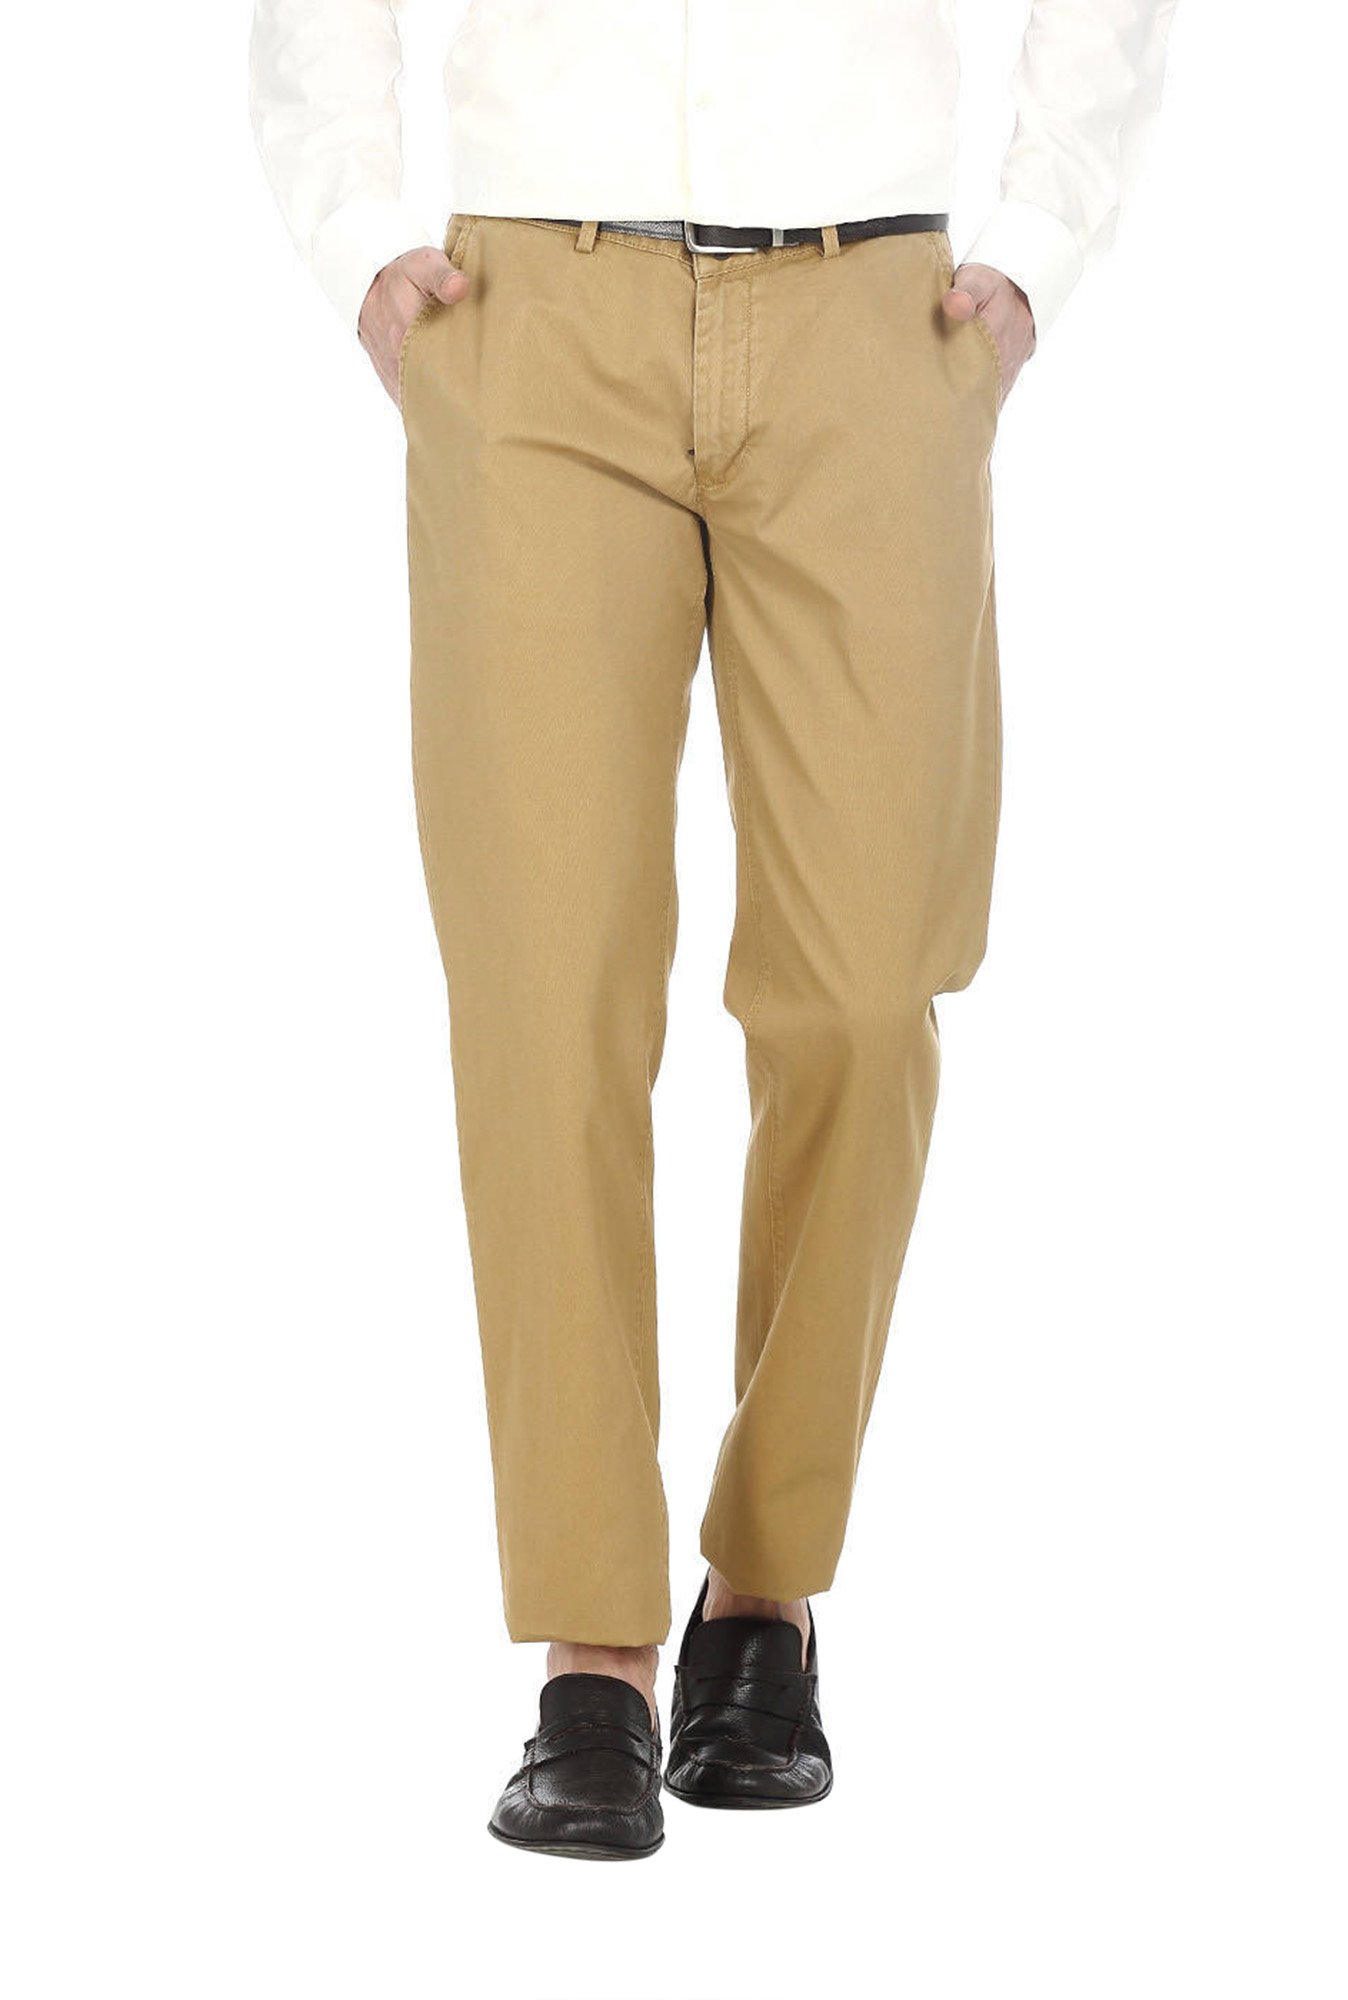 Buy BASICS Men Brown Solid Tapered fit Regular trousers by Basic Life  online  Looksgudin